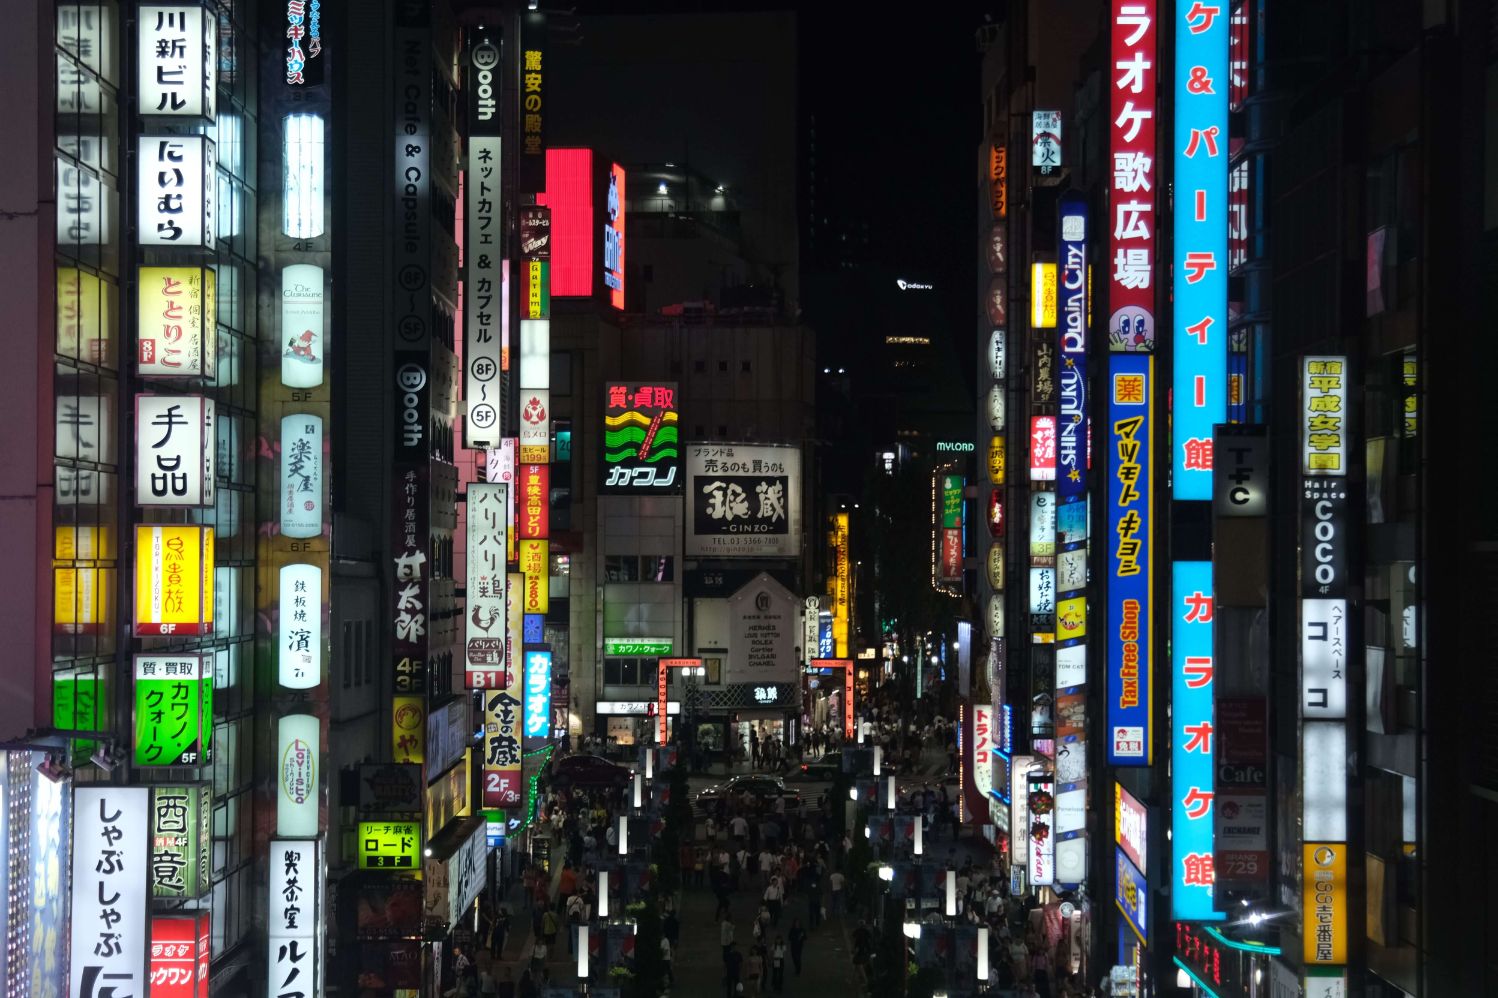 Typical vertical neon signs that is associated strongly with the image Tokyo. There are many of them in Tokyo, but you will not get a better vantage point than this.